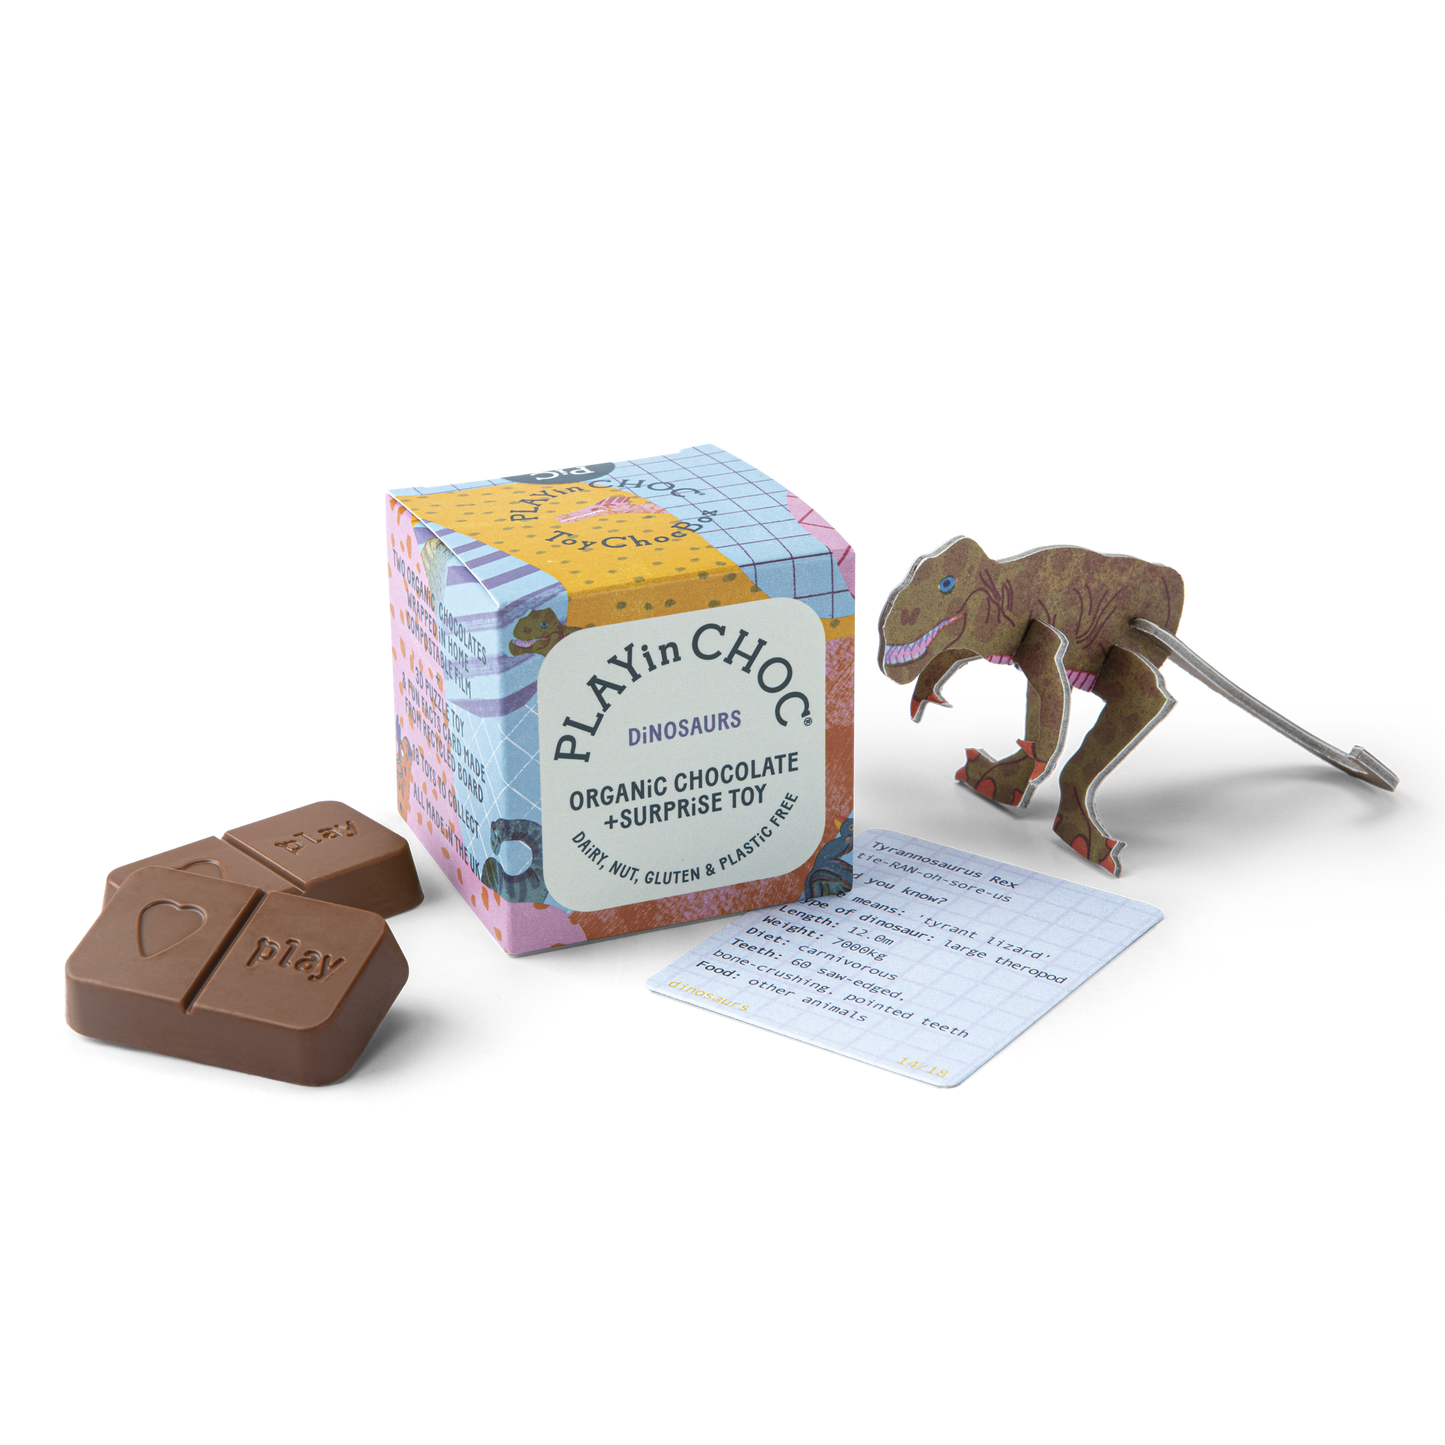 Playin Choc box centred against a white background.  A T. rex card figure has been assembled and is to the right of the box with the facts card right in front of it. The two chocolates of the box have been unwrapped and placed to the left of the box.